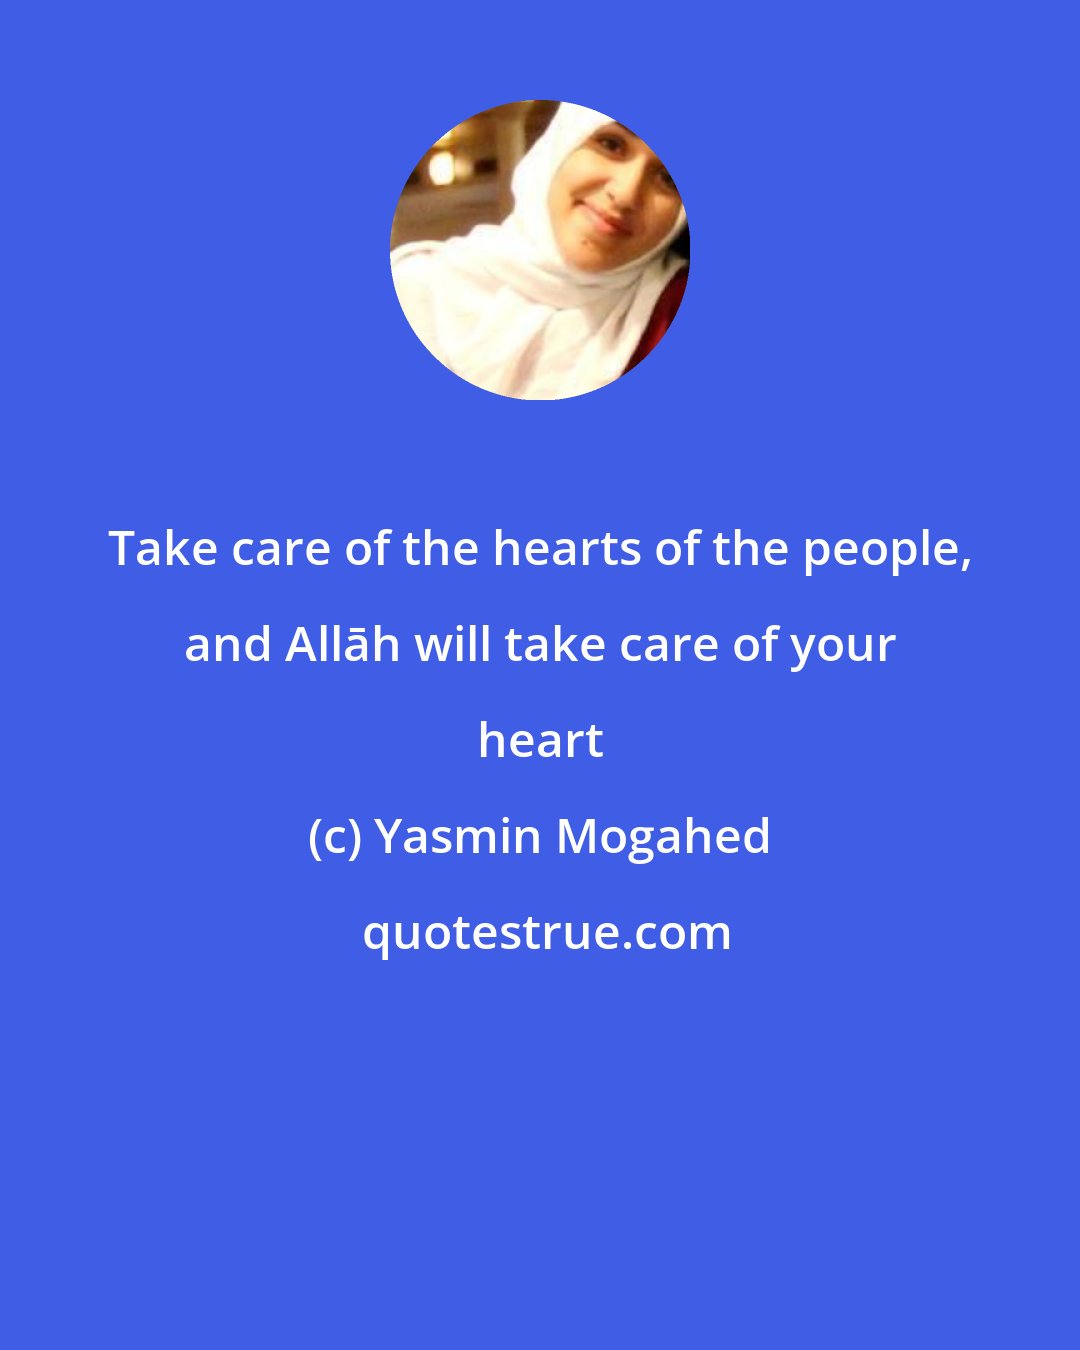 Yasmin Mogahed: Take care of the hearts of the people, and Allāh will take care of your heart